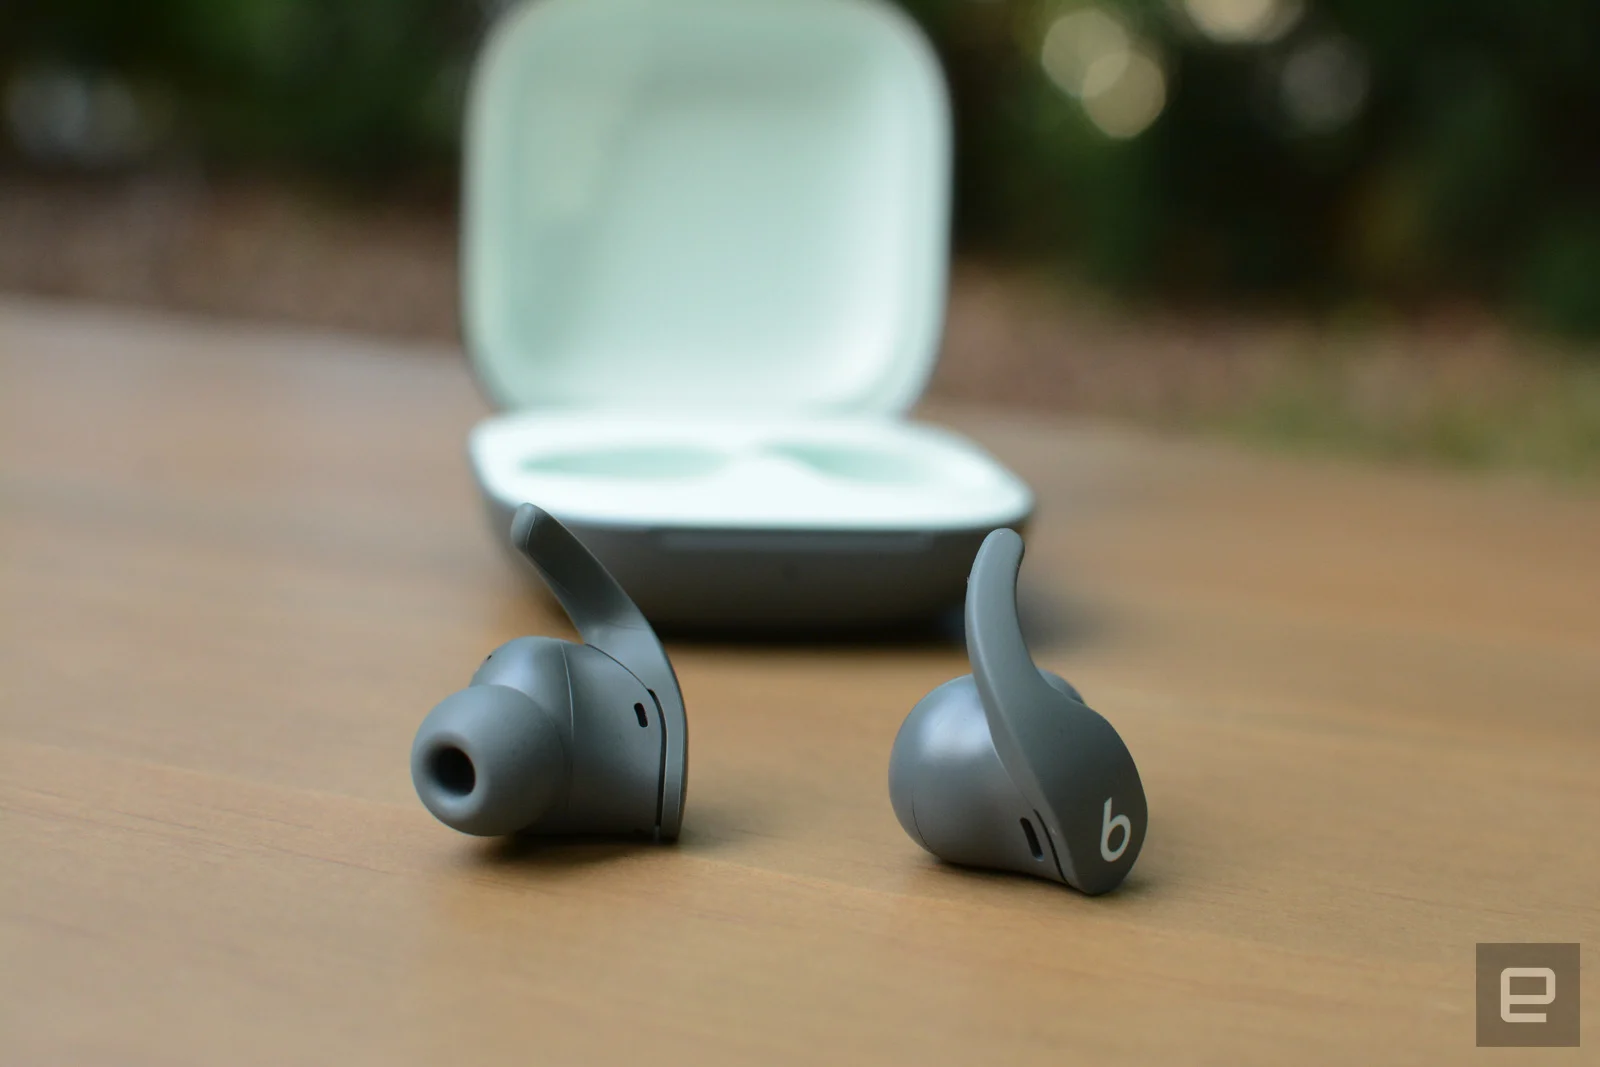 Beats’ latest true wireless earbuds offer all of the best features from Apple’s new AirPods in a less polarizing design.